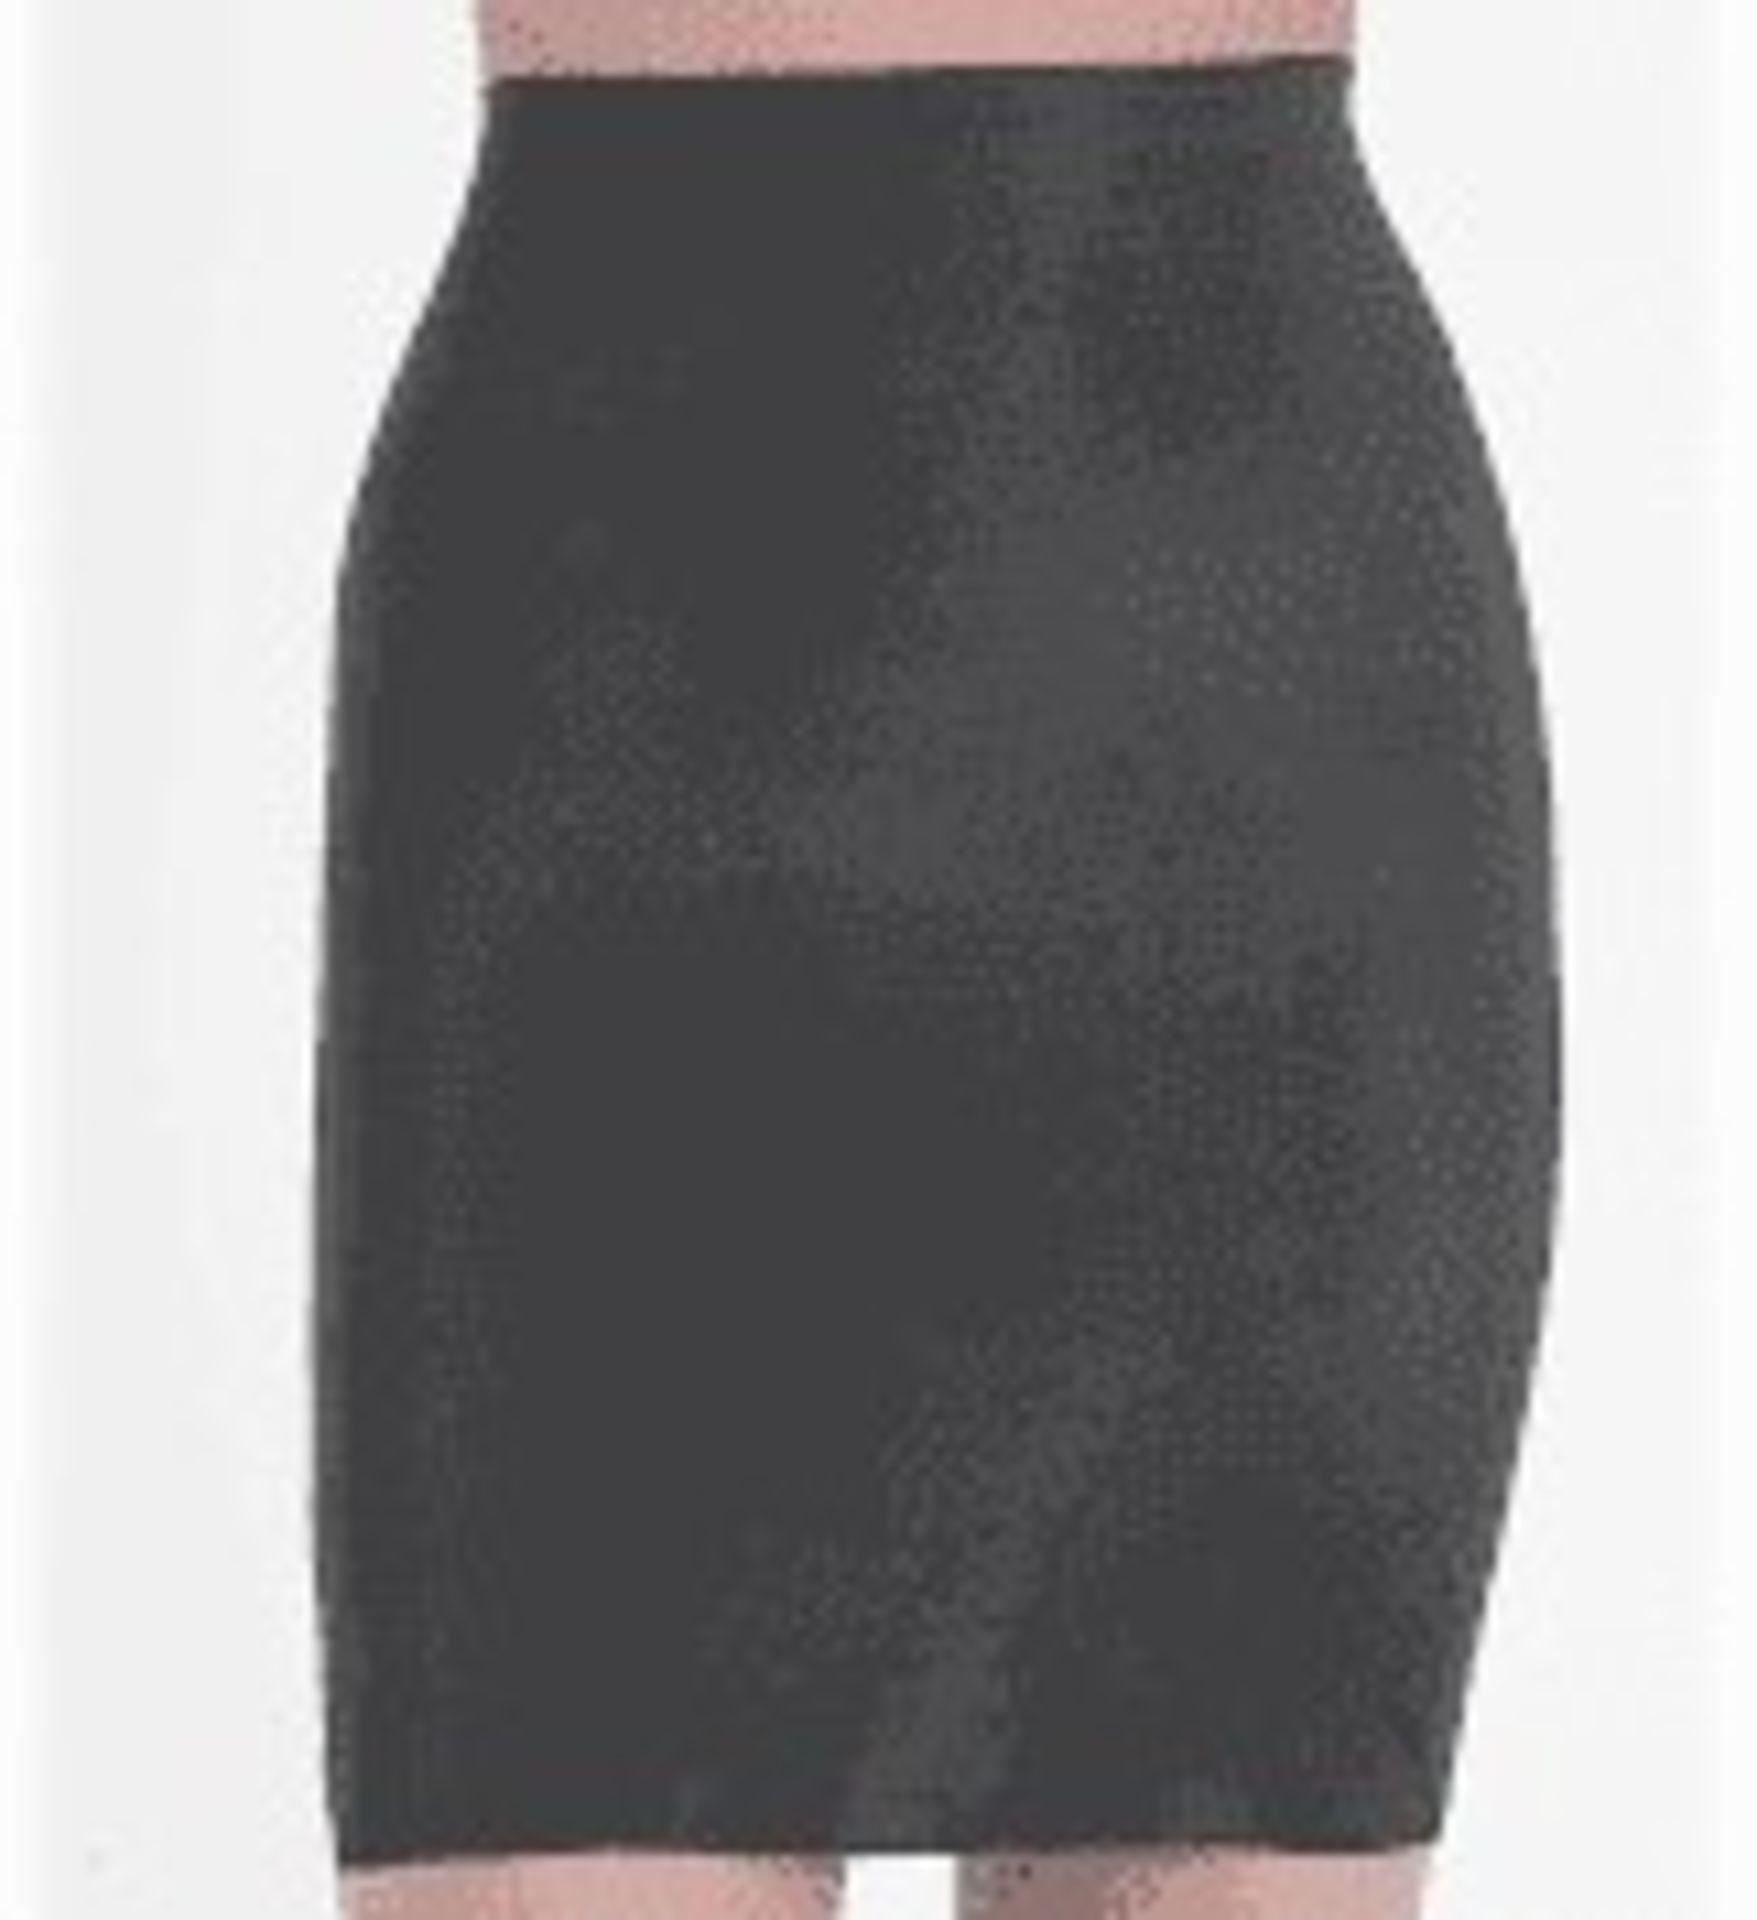 1 LOT TO CONTAIN 4 SPANX SKIRTS IN BLACK / SIZE 4 / STYLE 1899 / RRP £352.00 (PUBLIC VIEWING